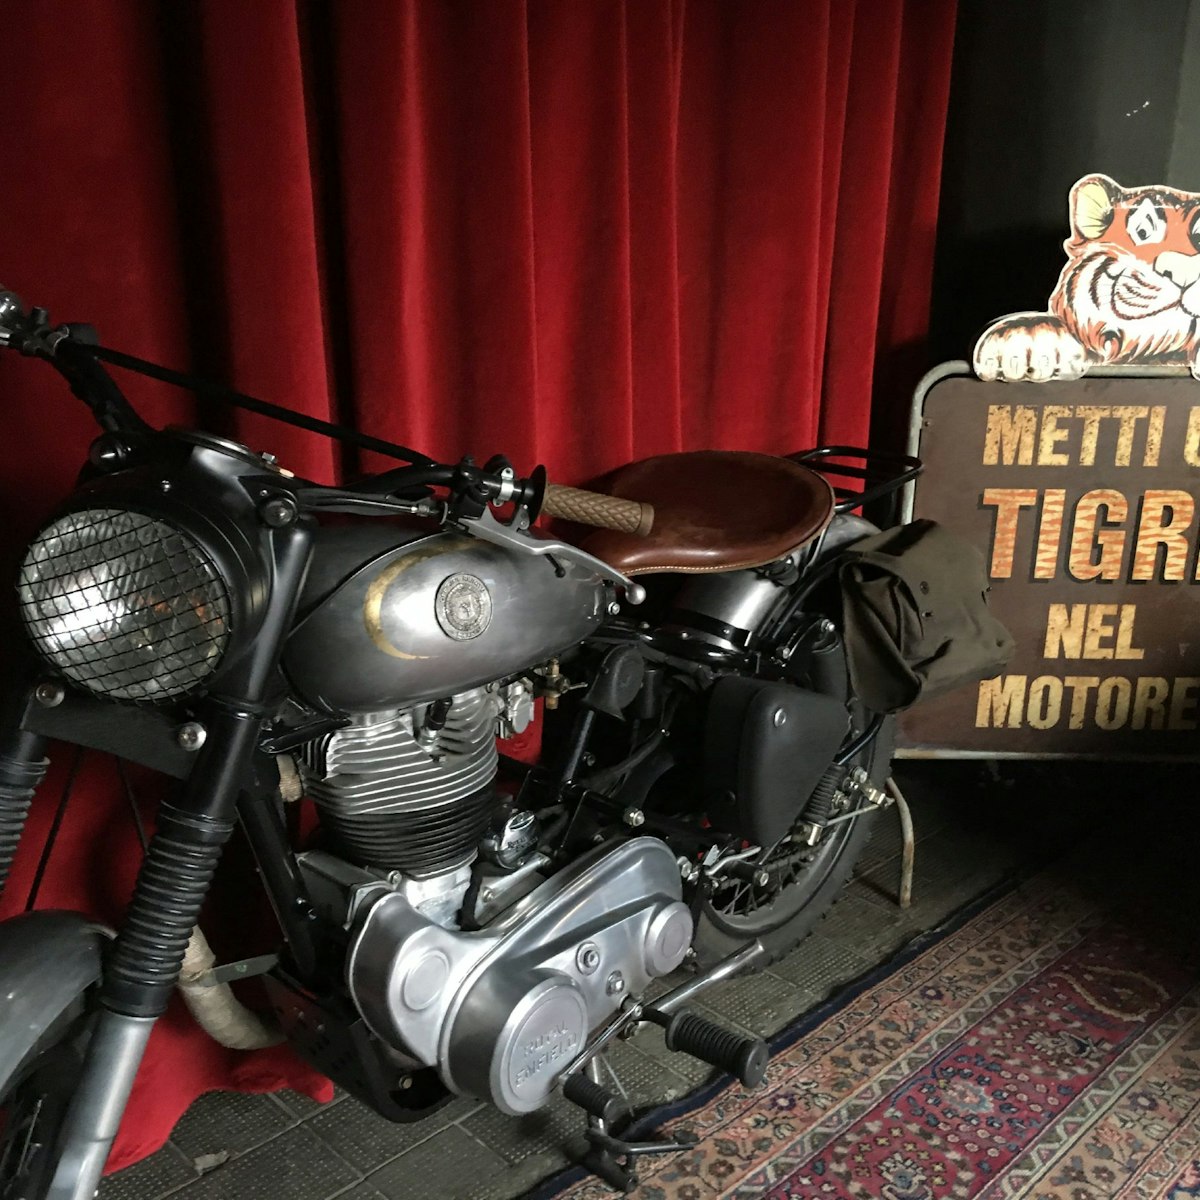 Vintage motorcycle and decor at Officine Riunite Milanesi